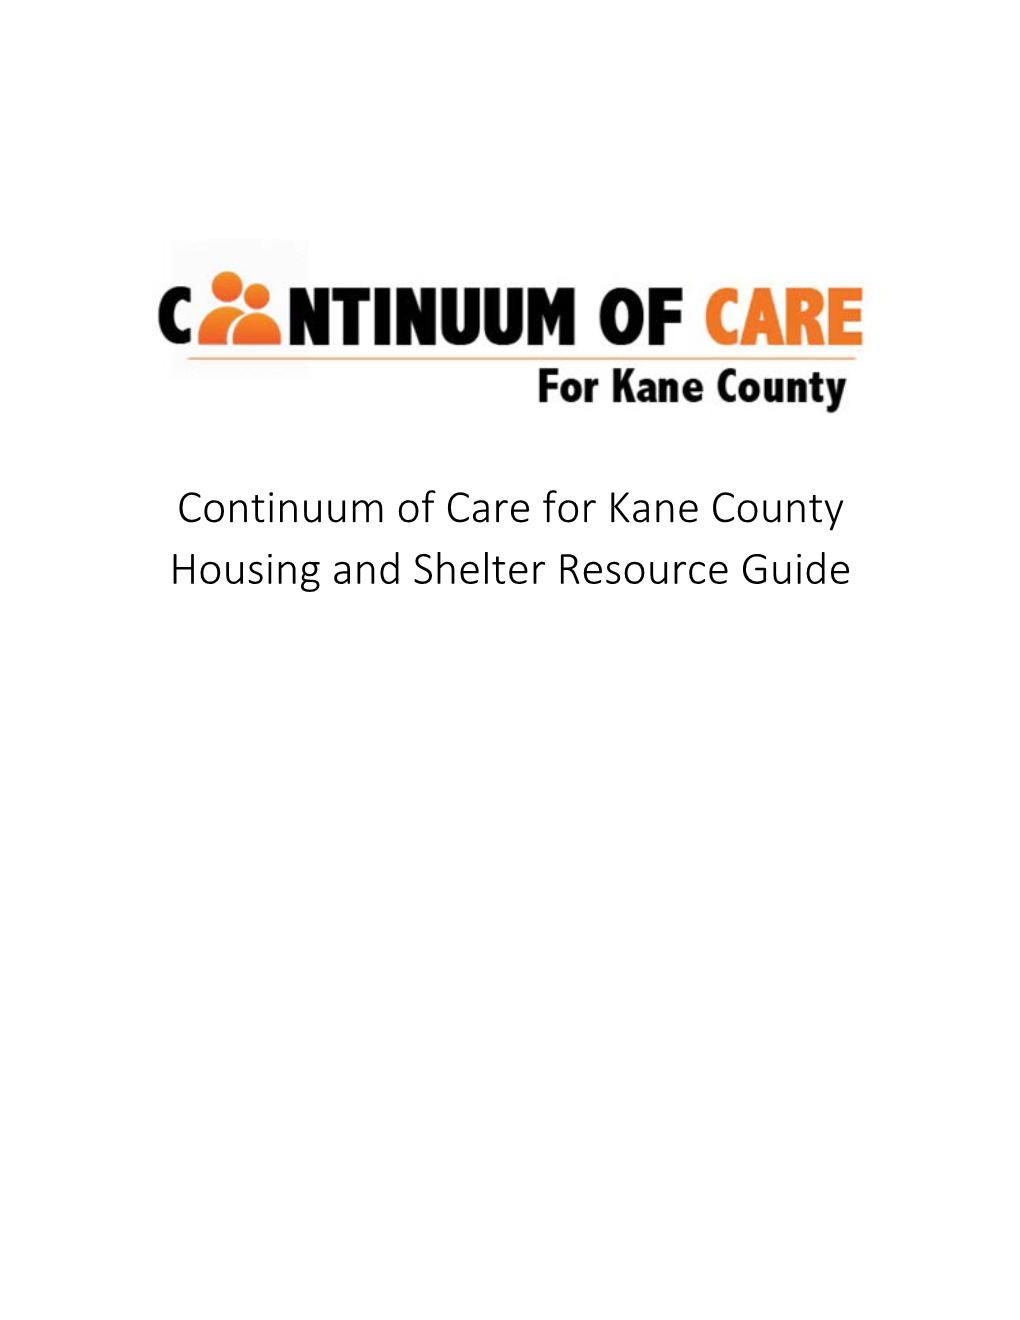 Continuum of Care for Kane County Housing and Shelter Resource Guide